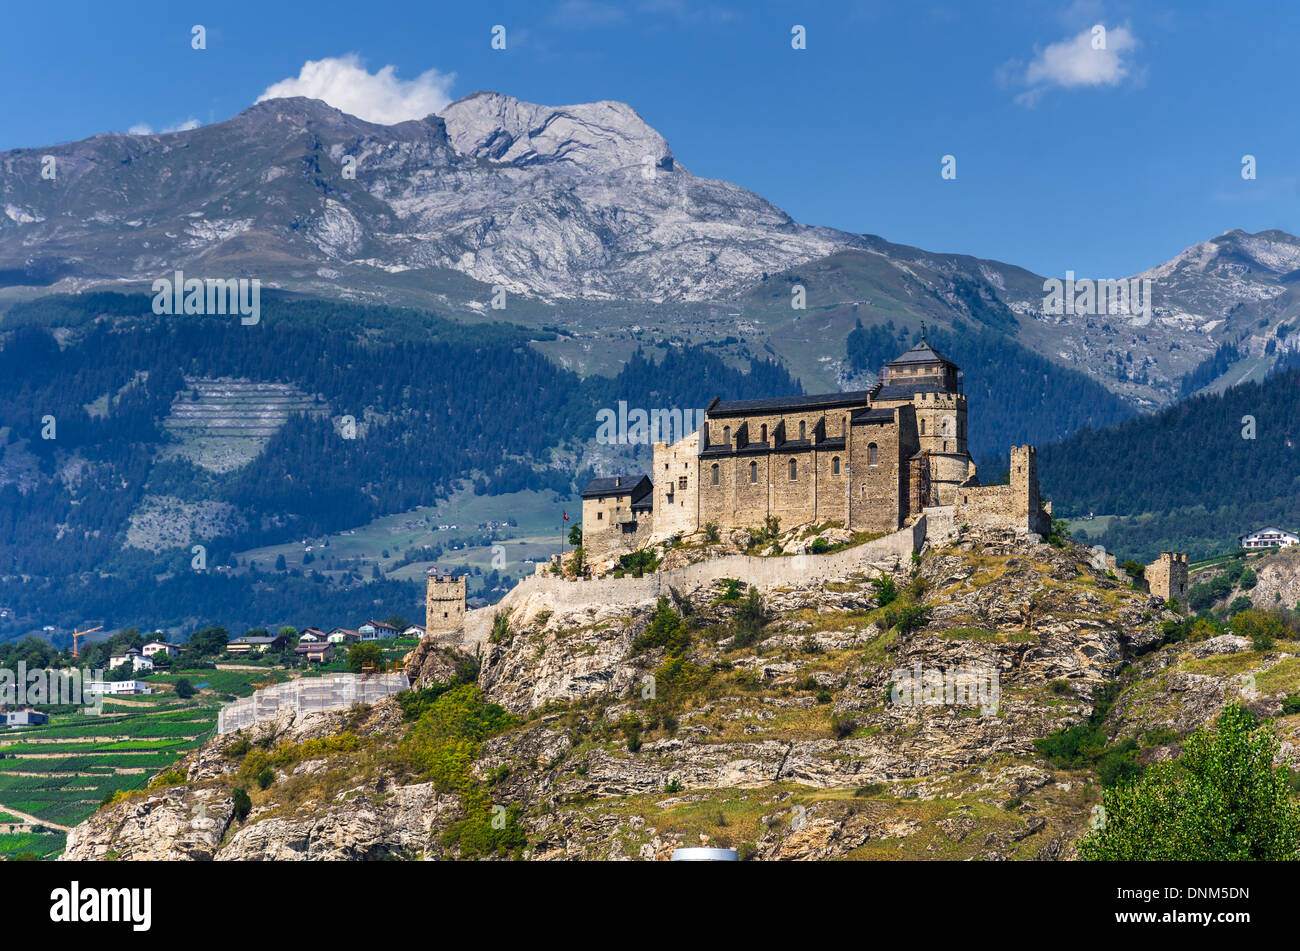 Sion, Switzerland. Notre-Dame de Valere, fortified church in canton of Valais, built in 12th century. Stock Photo